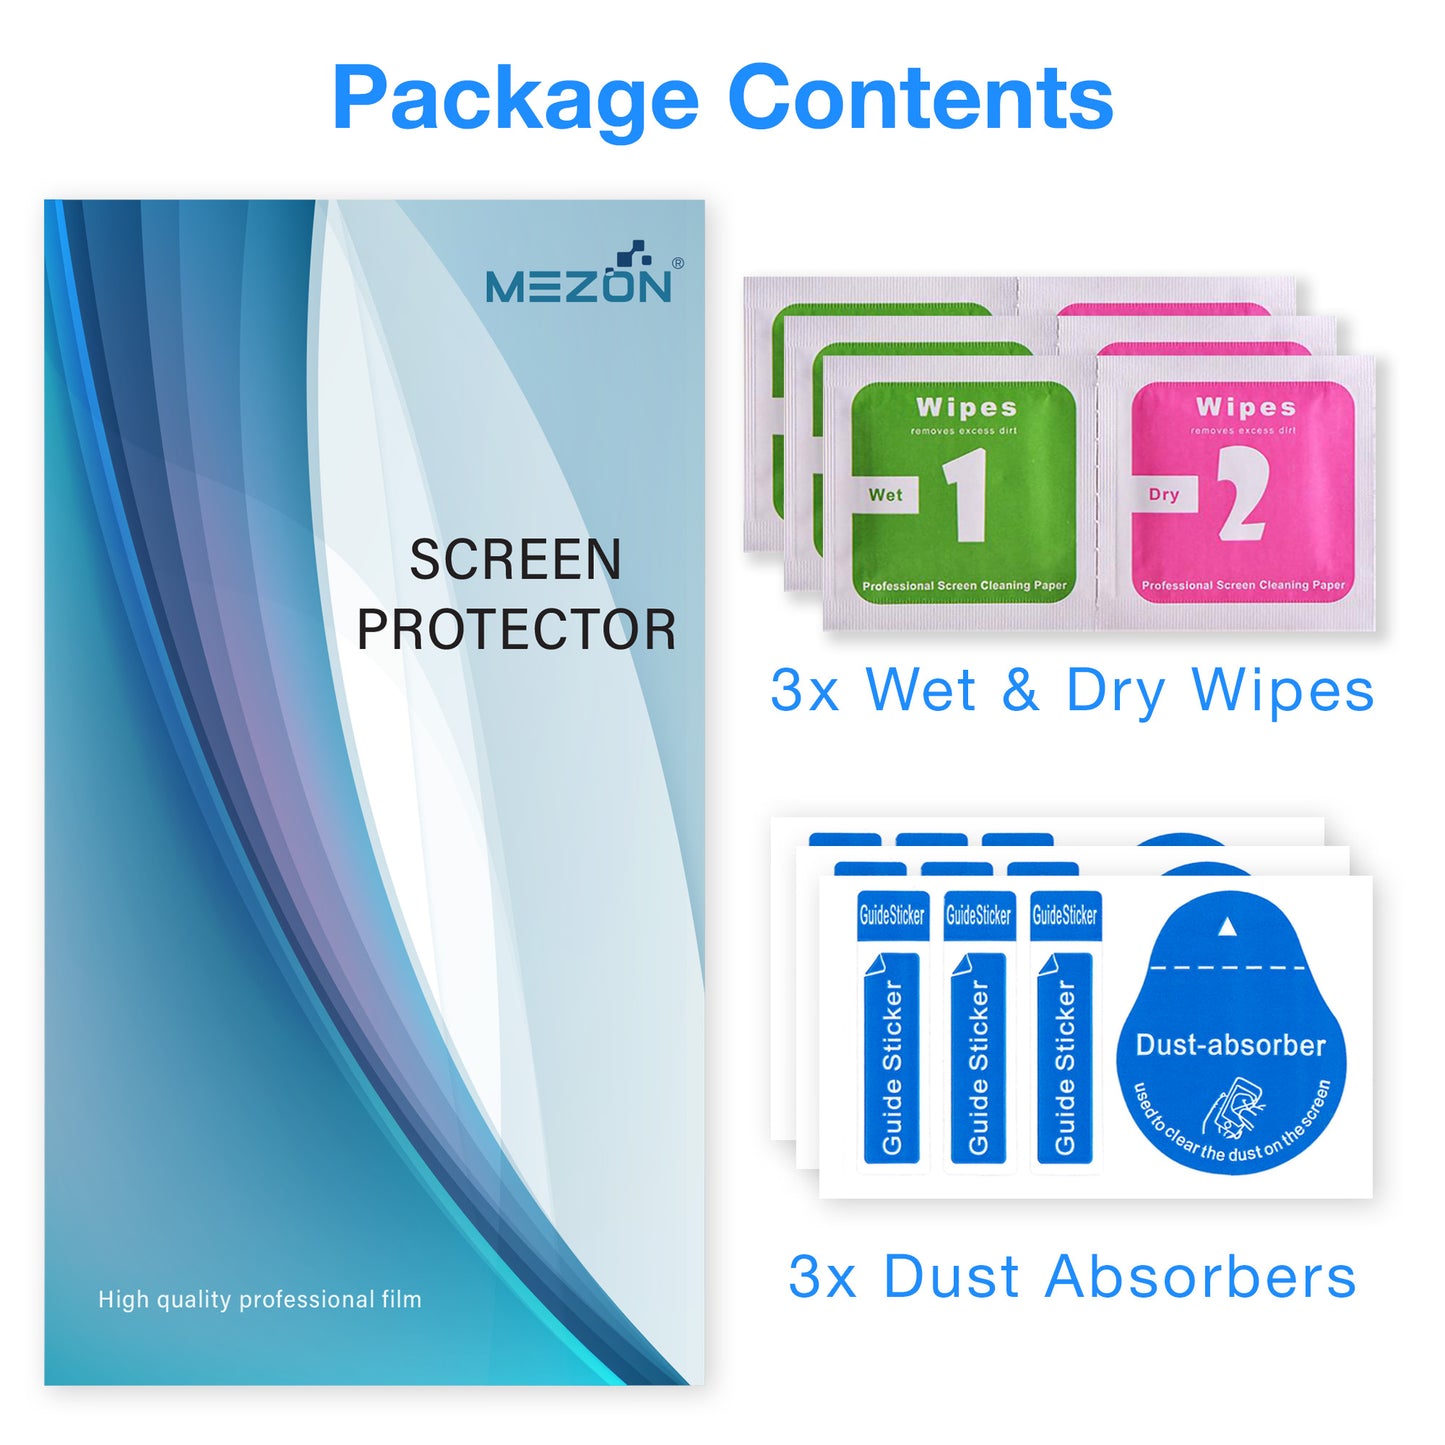 [3 Pack] MEZON Realme 7 5G Ultra Clear Screen Protector Case Friendly Film (Realme 7 5G, Clear)